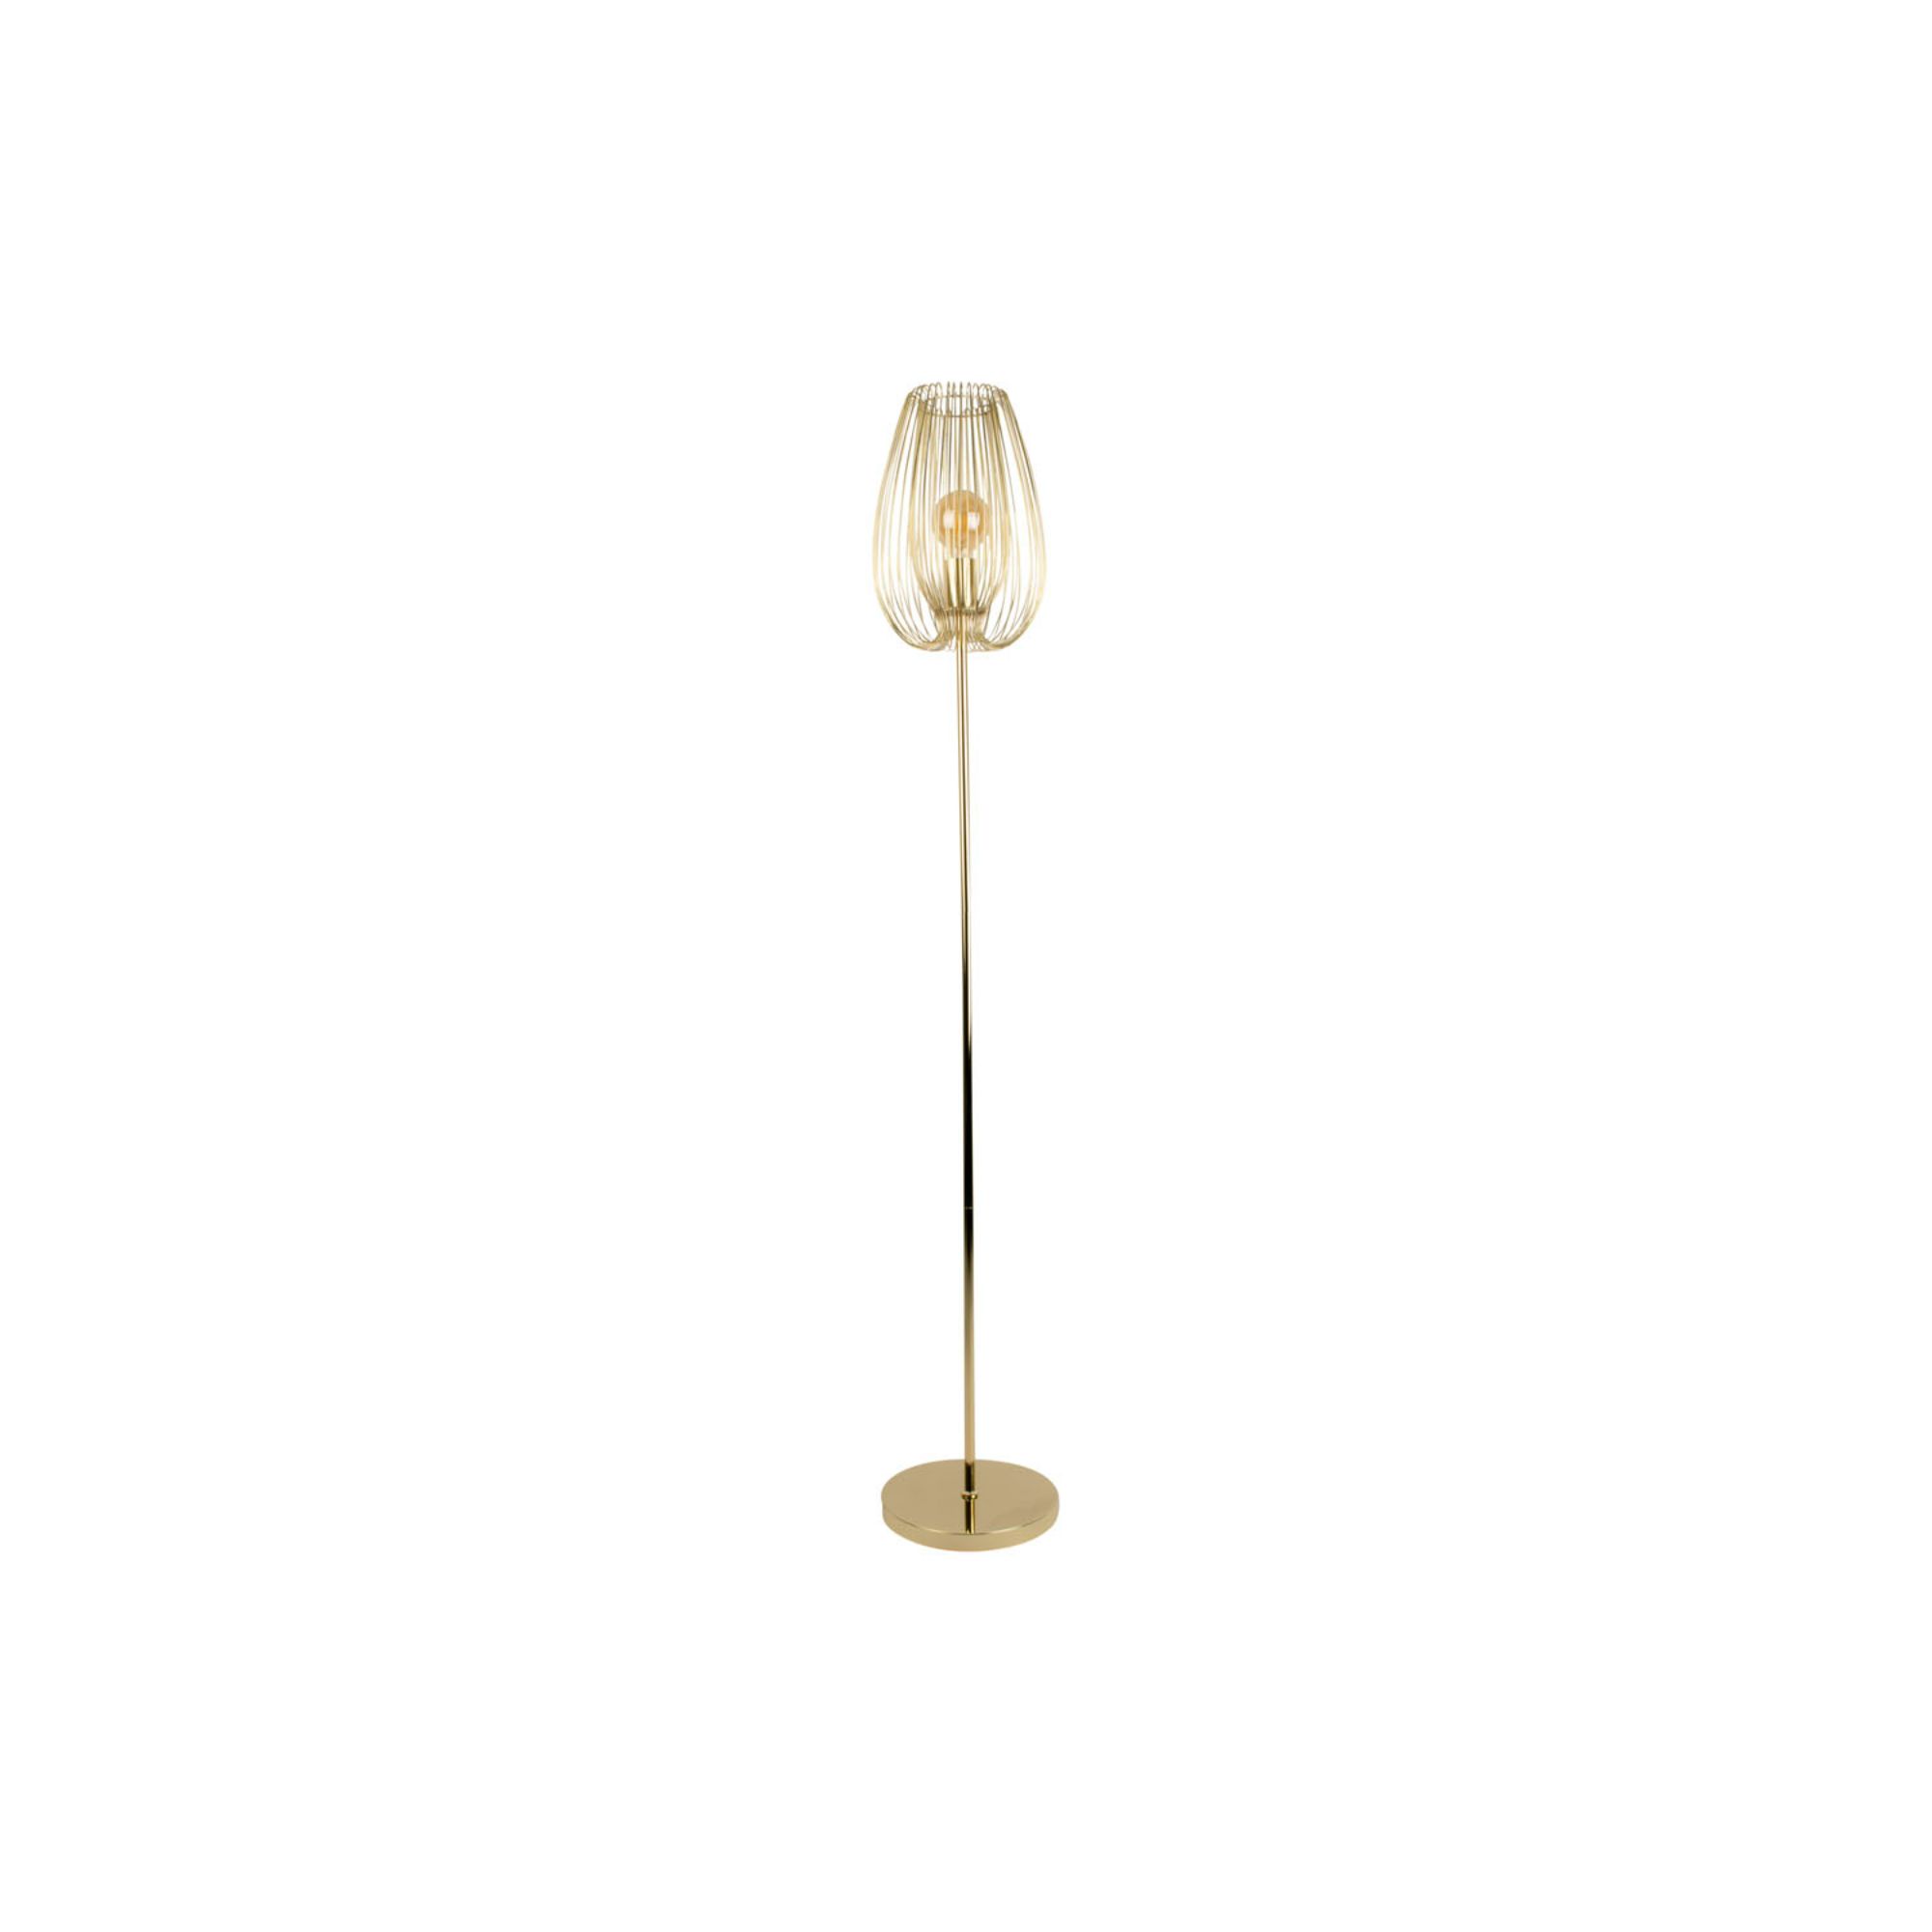 Floor lamp Lucid - Gold plated